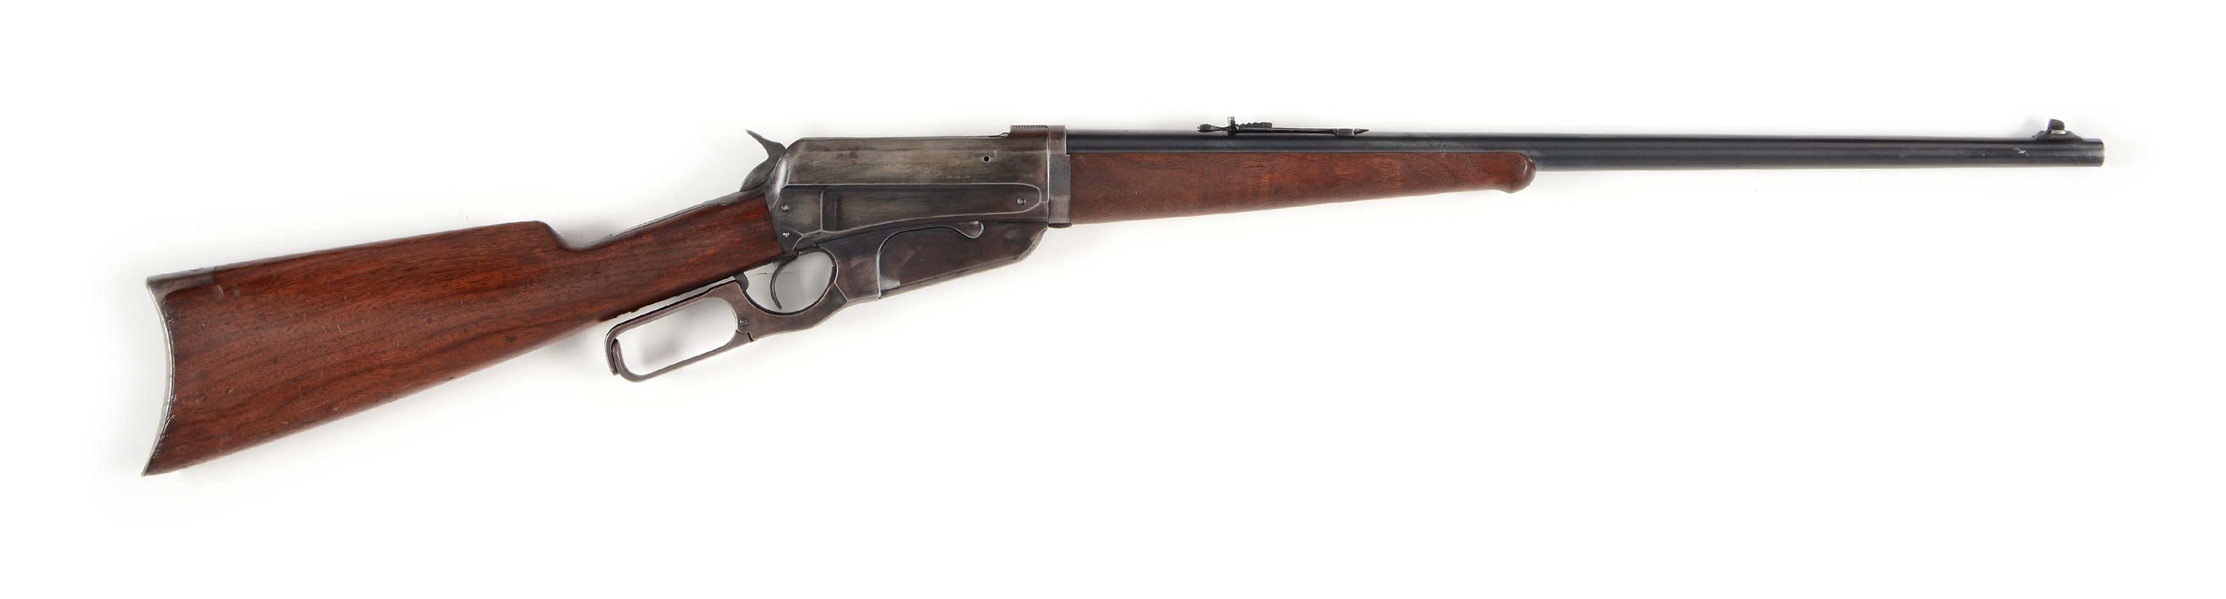 (C) WINCHESTER MODEL 1895 TAKE DOWN LEVER ACTION RIFLE (1915).